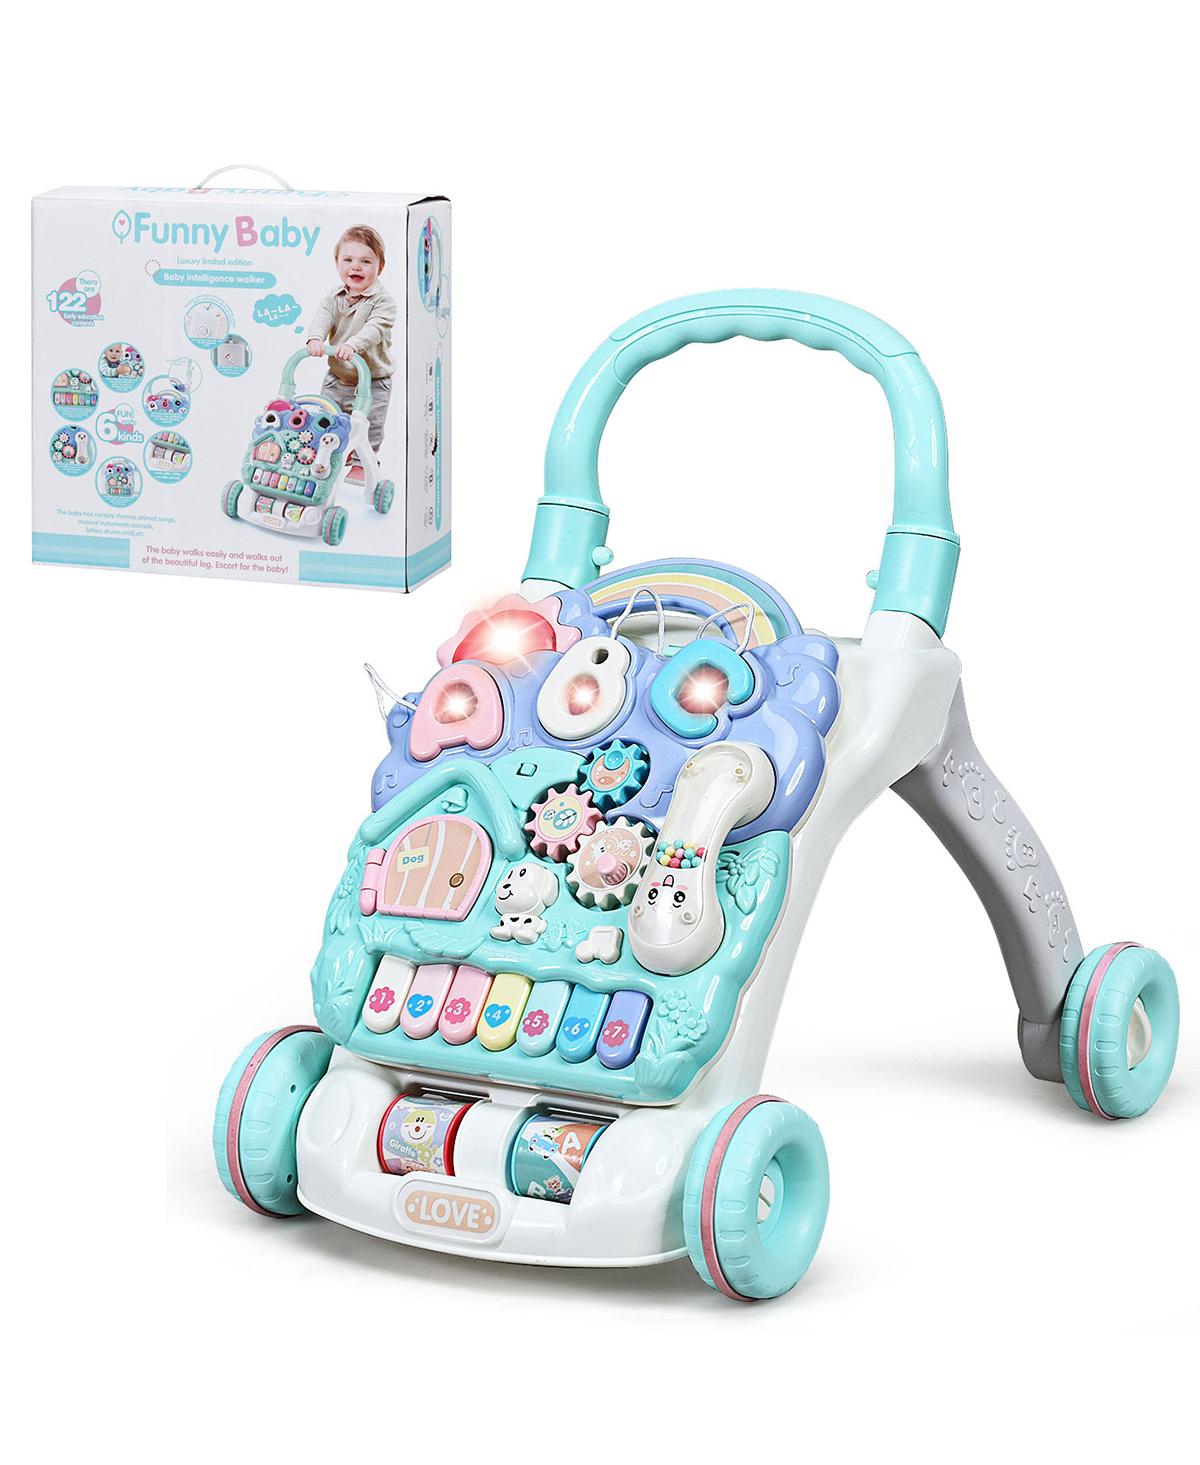 Costway Baby Sit-to-stand Learning Walker Toddler Activity Center Musical Toy W/ Lights In Blue